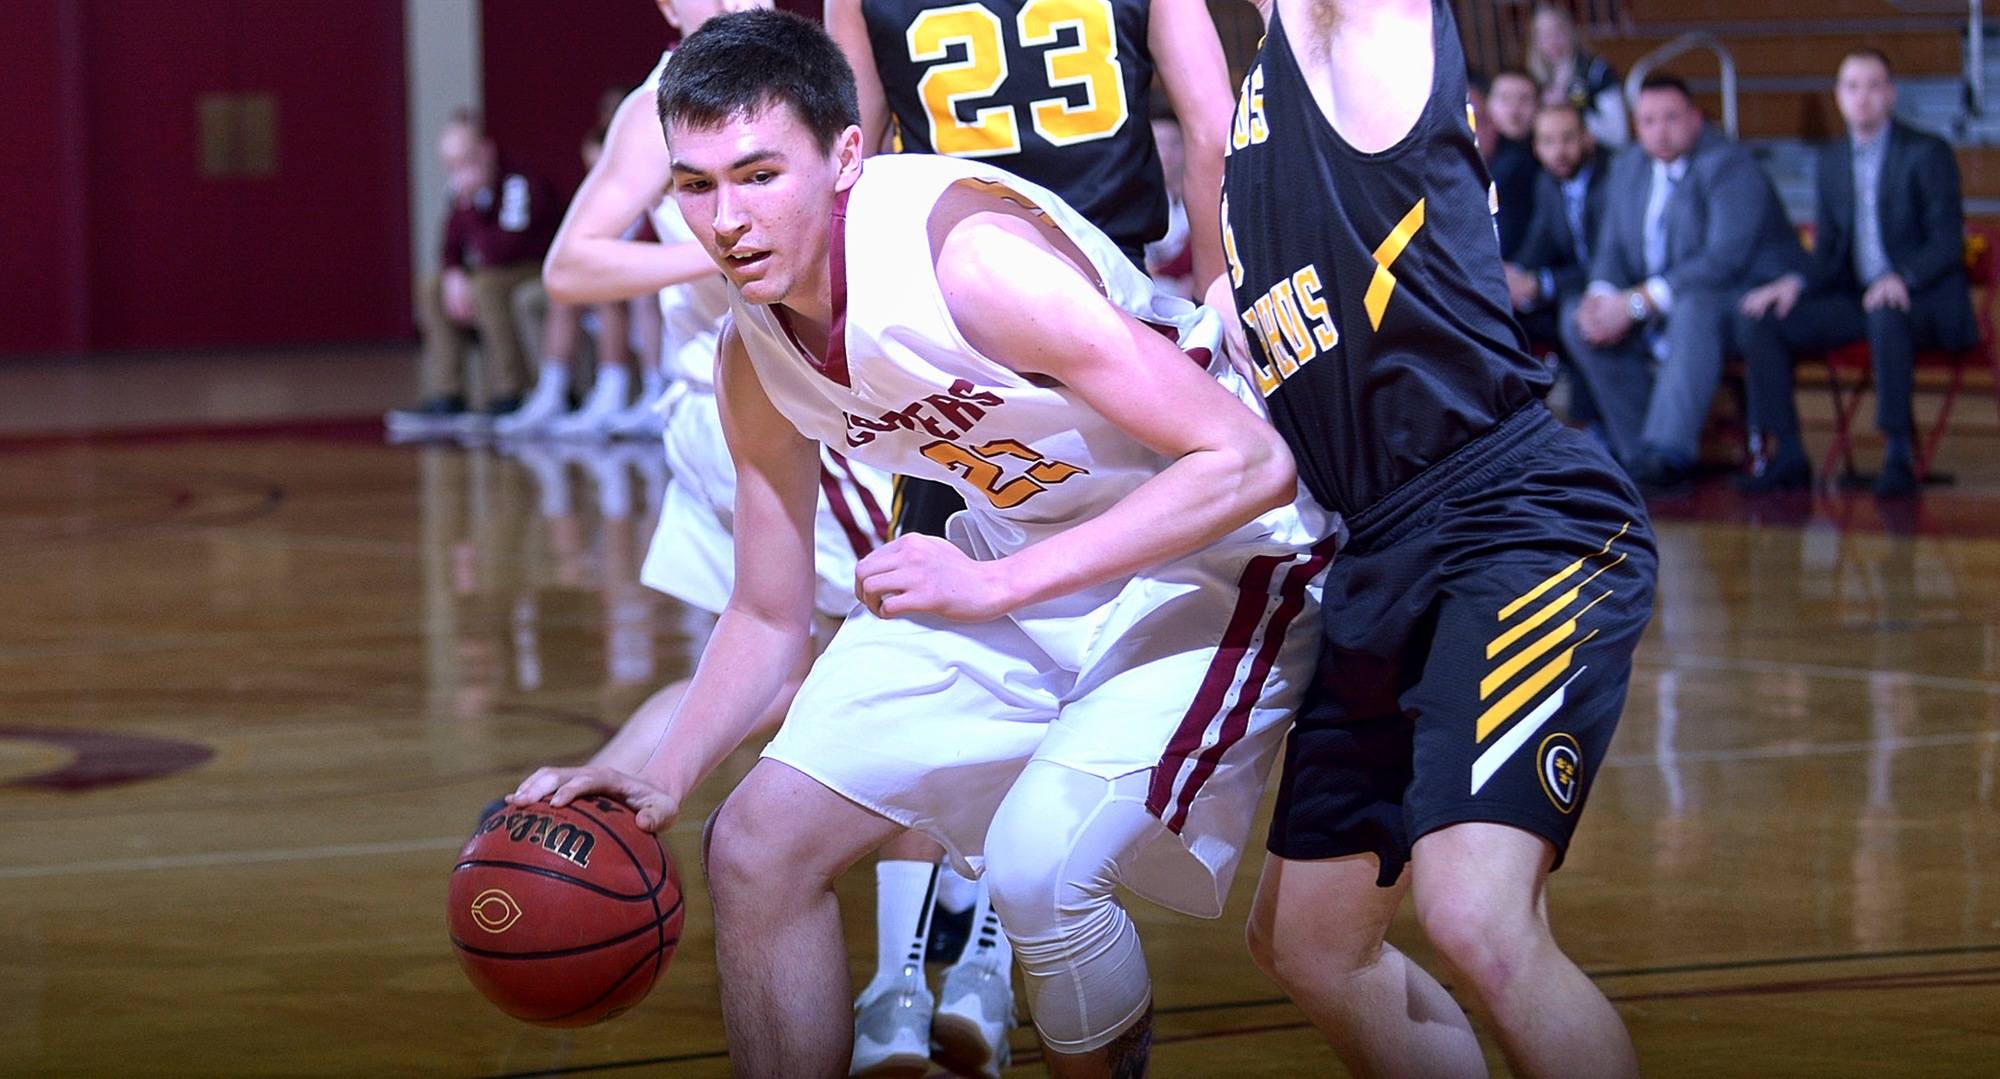 Jordan Davis had 16 points and six rebounds in the Cobbers' win over Oak Hills Christian.